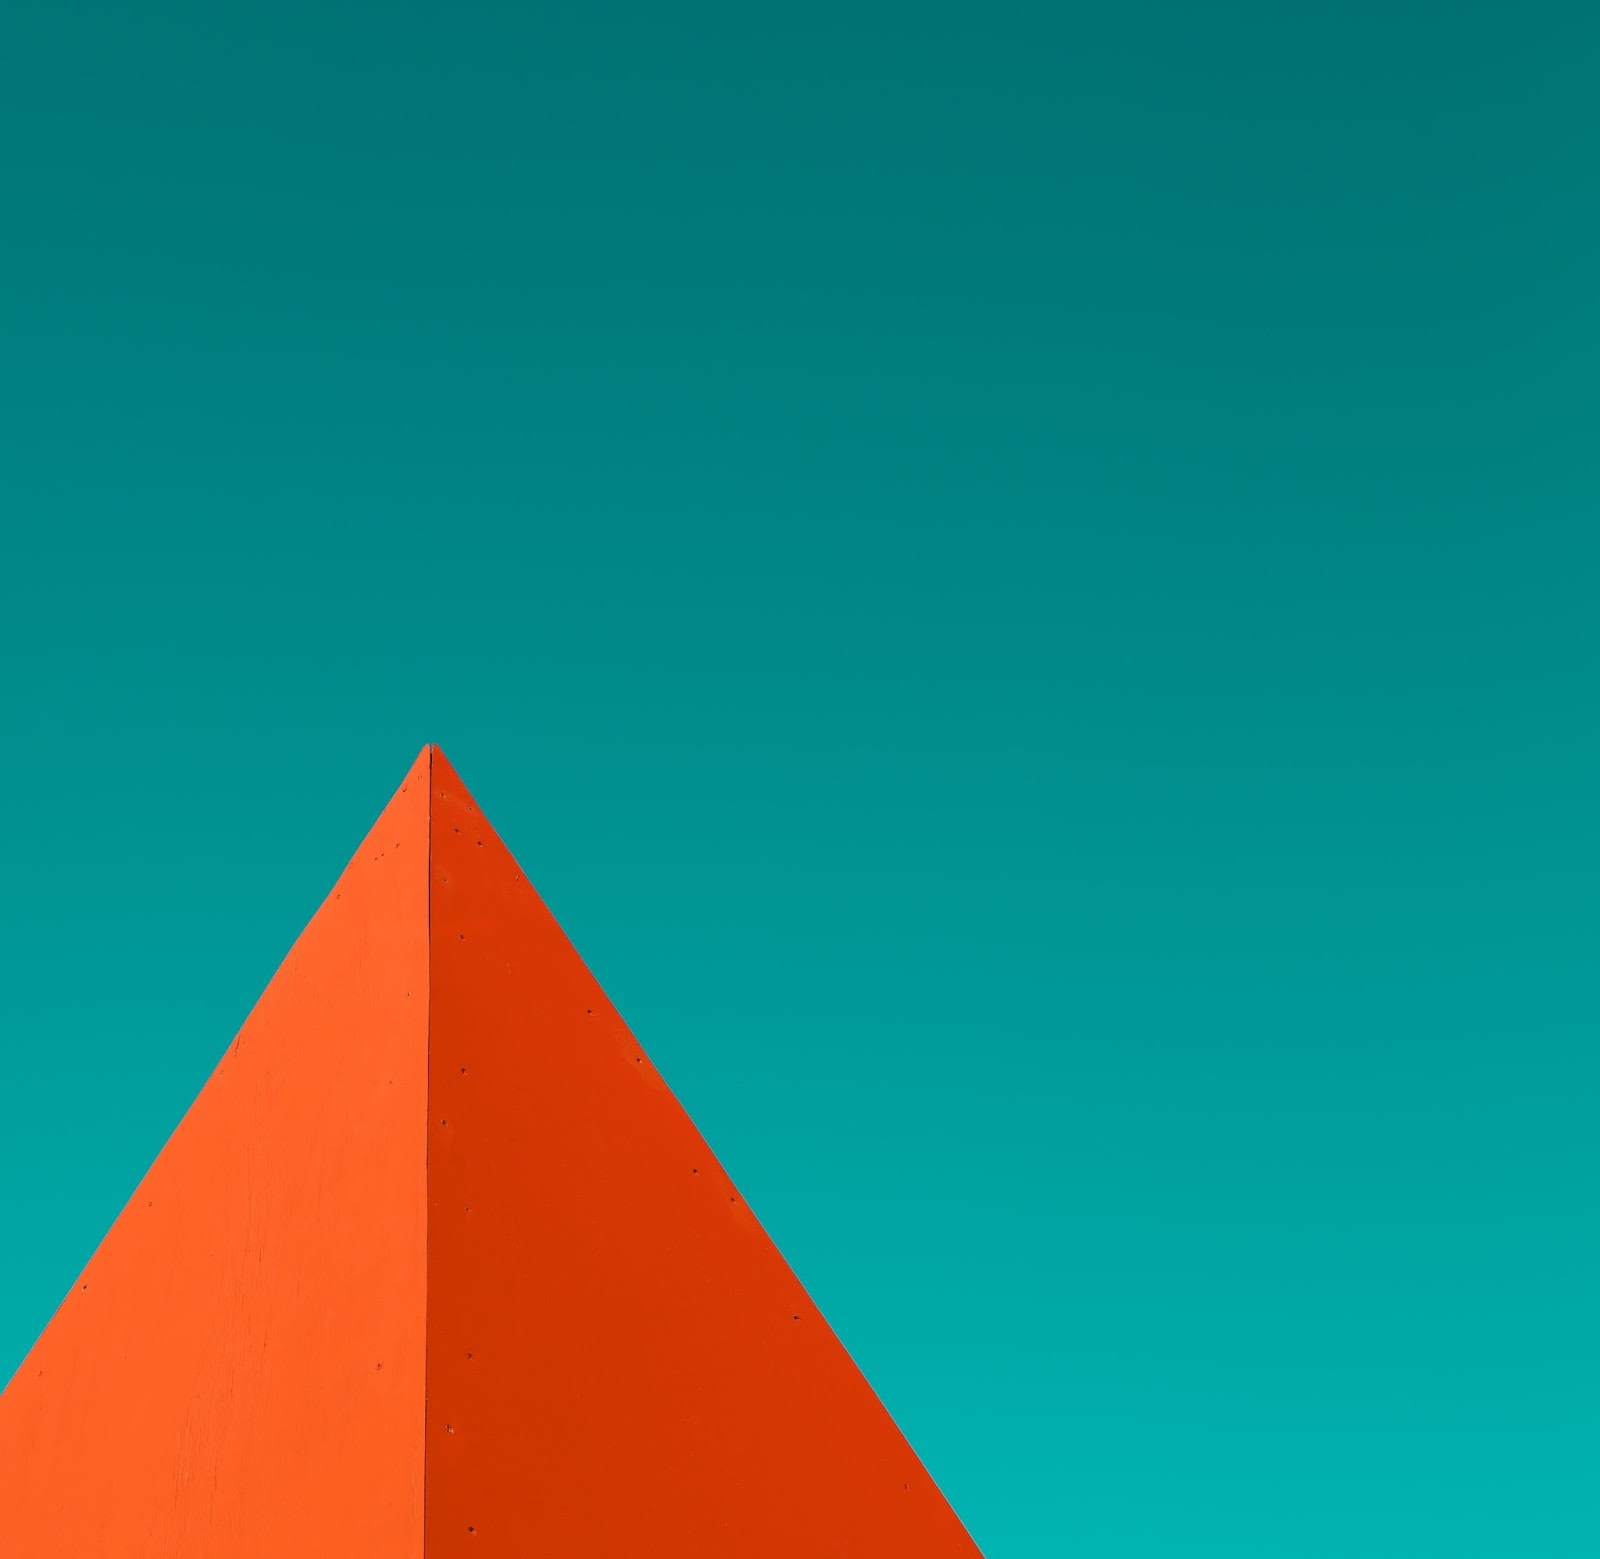 8.Android M wallpaper